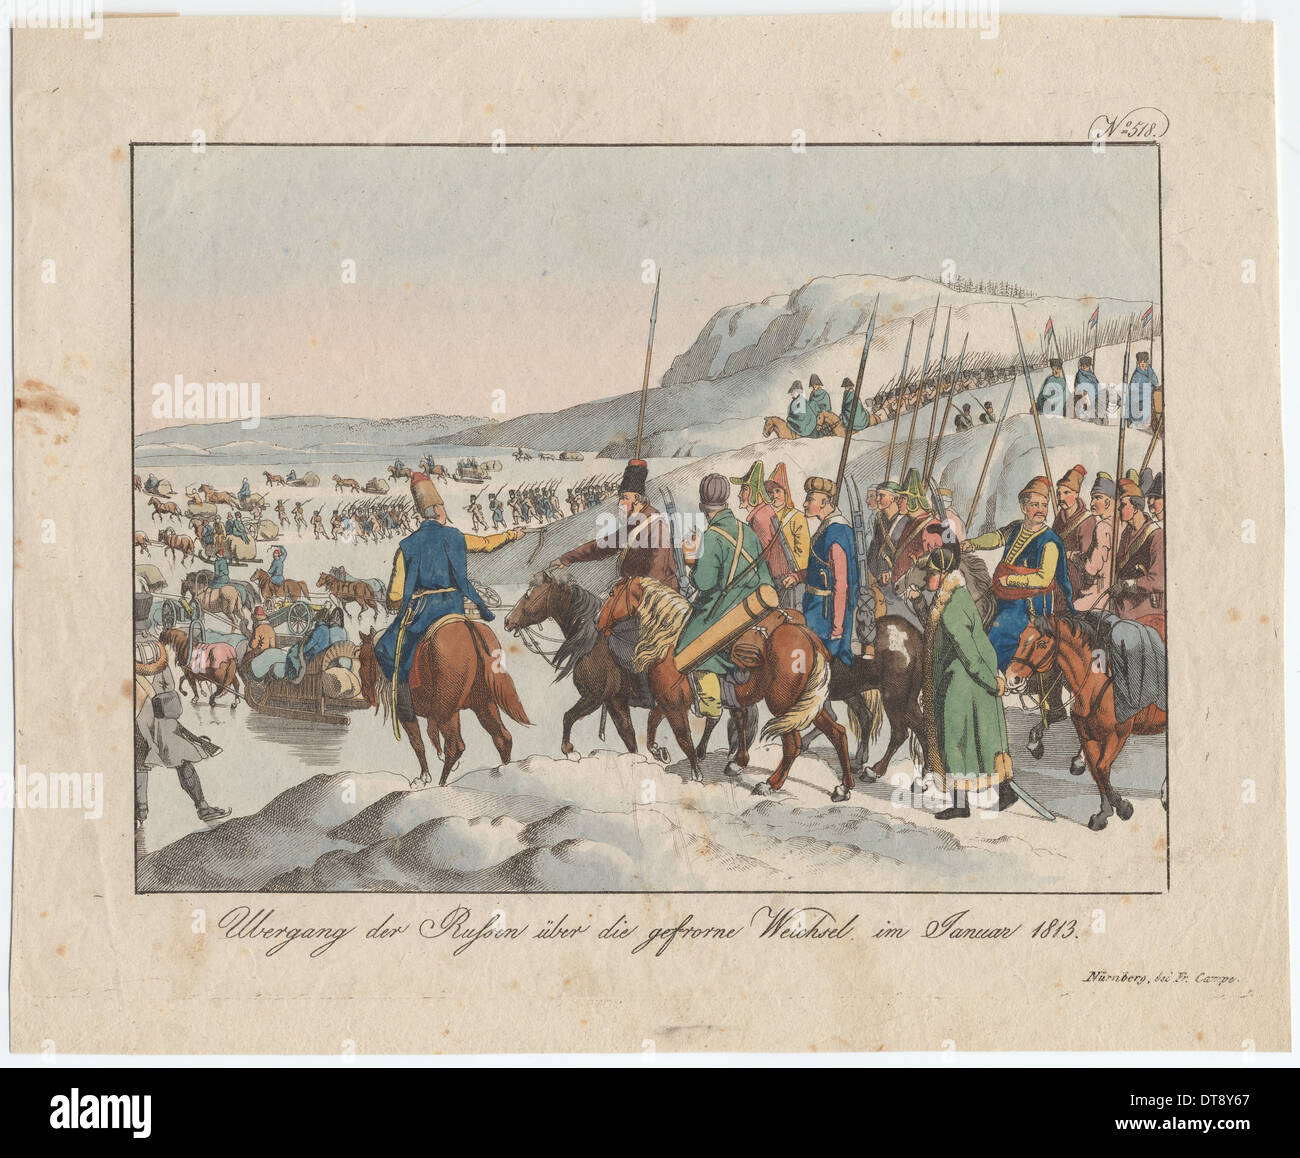 The Russian Army crosses the Vistula in January 1813, c. 1815. Artist: Campe, August Friedrich Andreas (1777-1846) Stock Photo